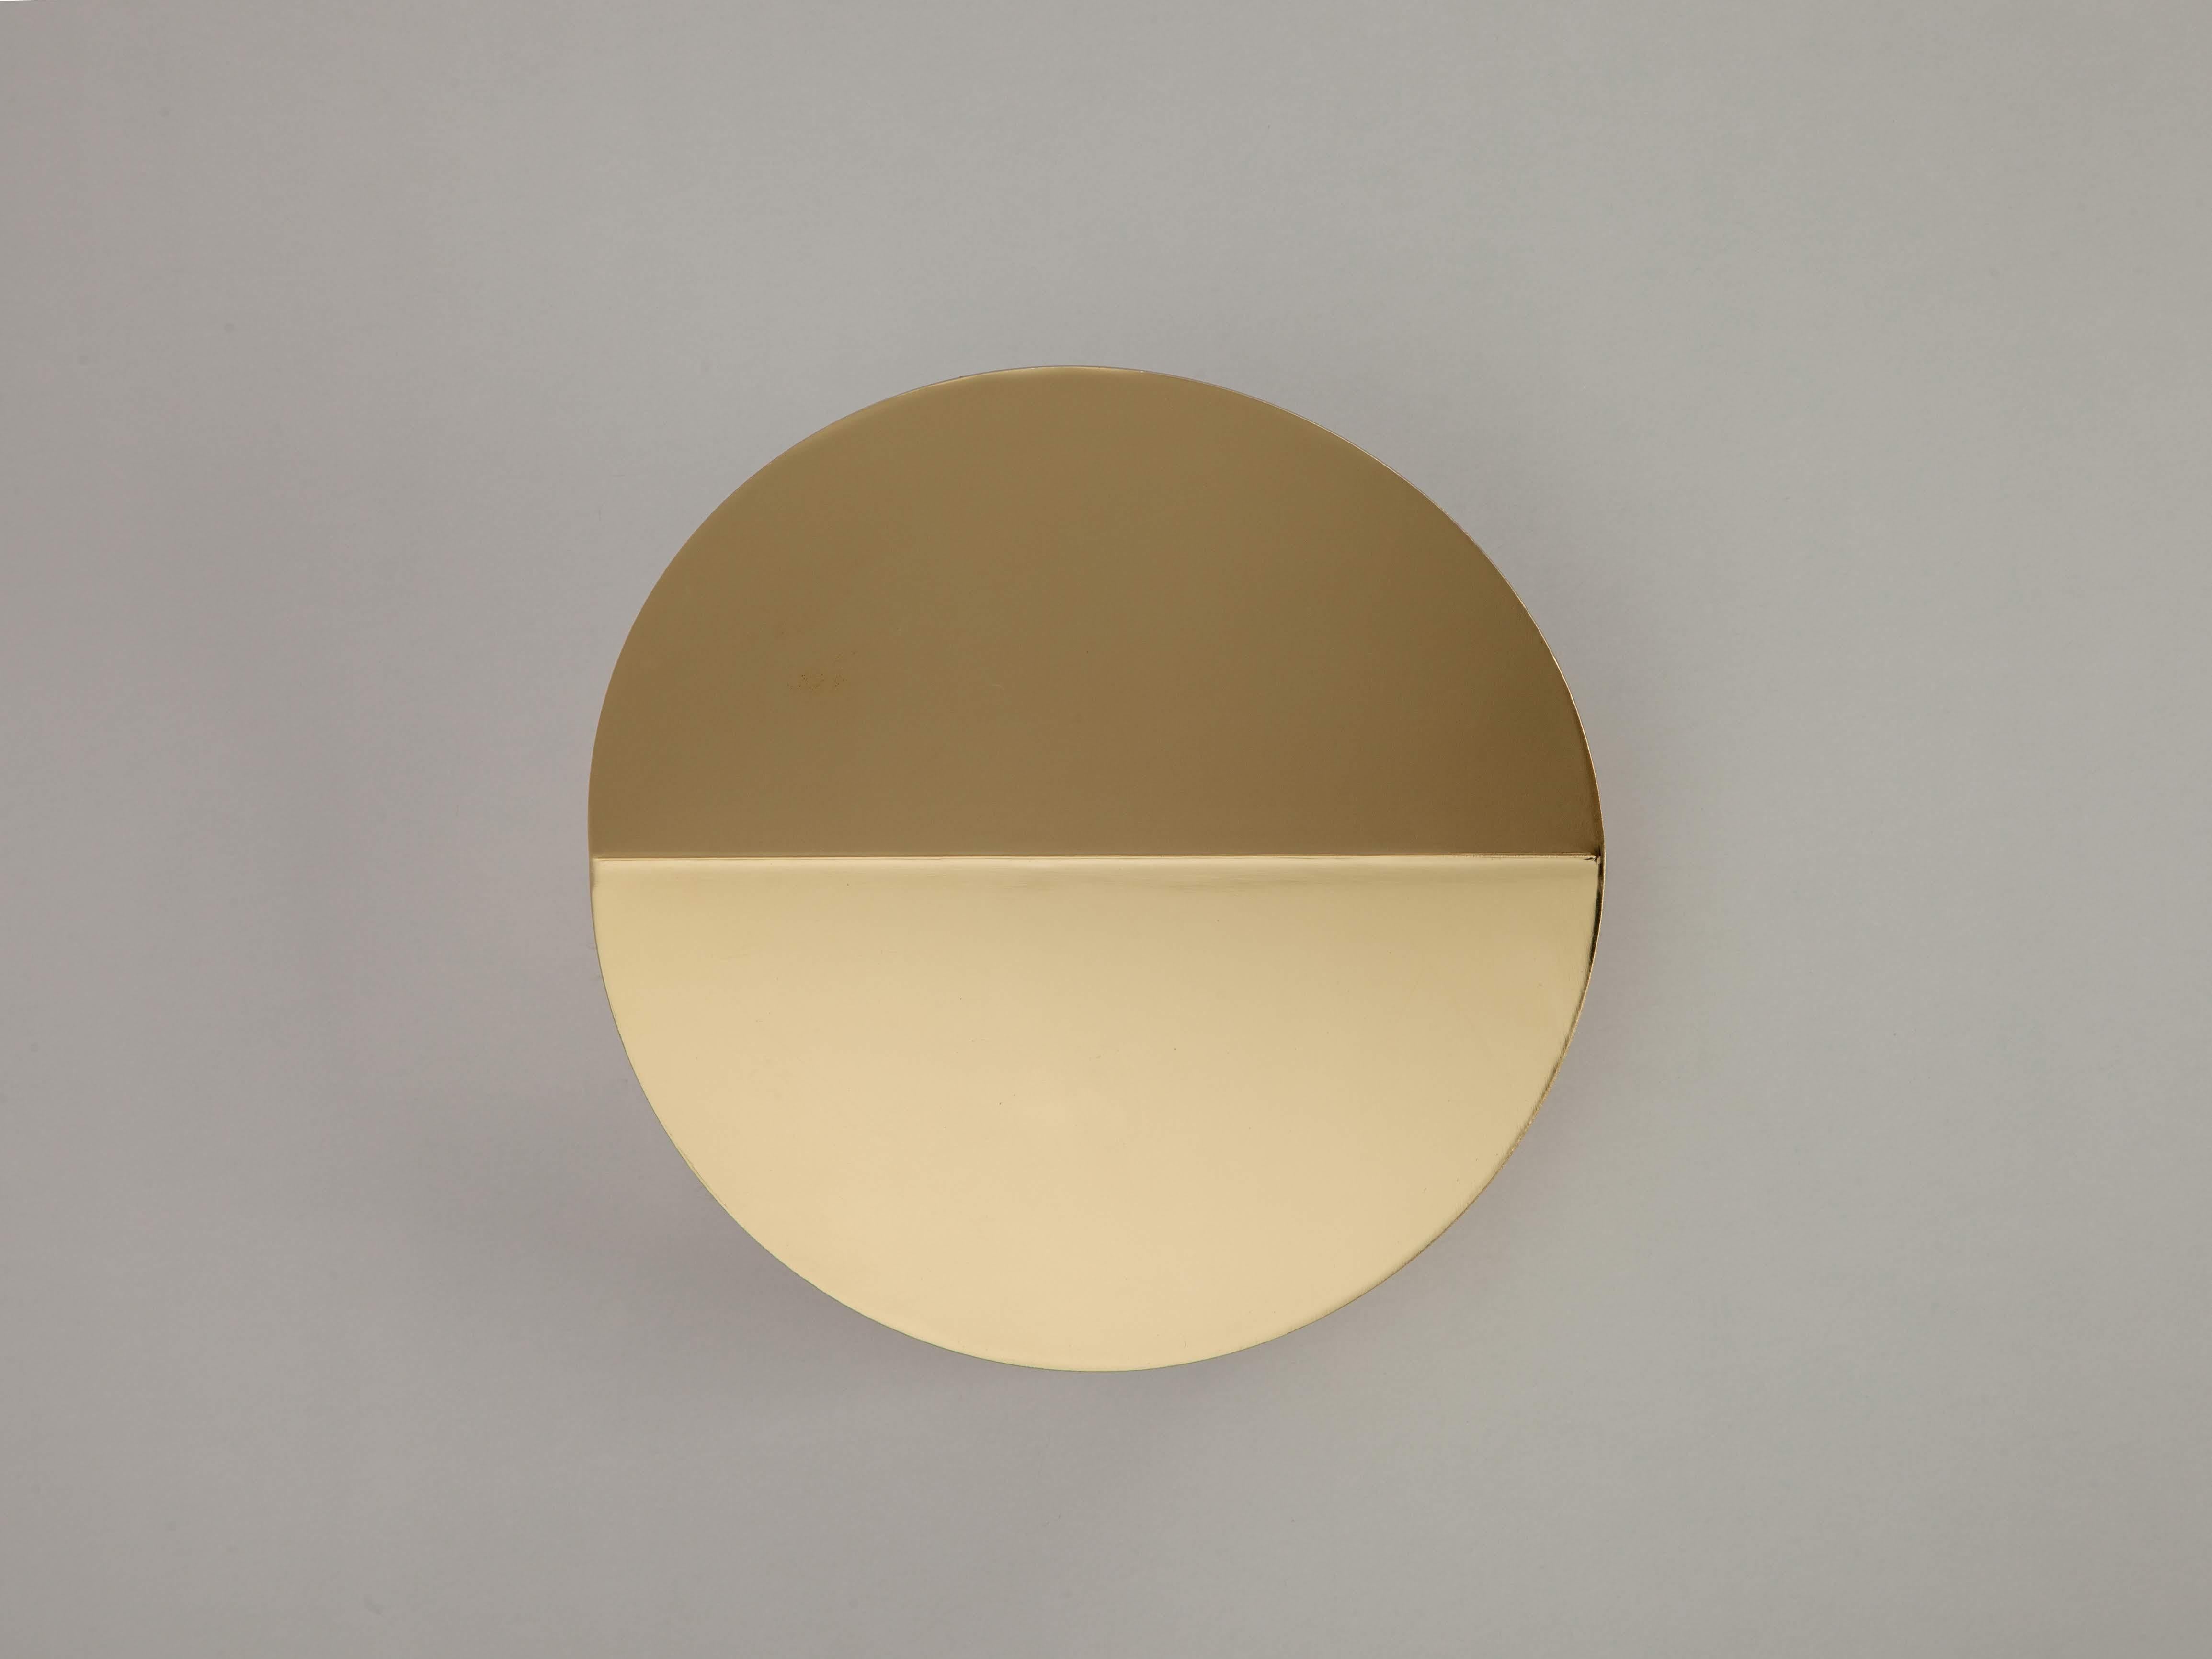 This versatile, low-profile wall light is part of the houseof diffuser family. The round shade folds to diffuses a warm illuminating glow. Ideal for a living space or bedroom. Brass is a stylish finish to this contemporary design. A popular neutral